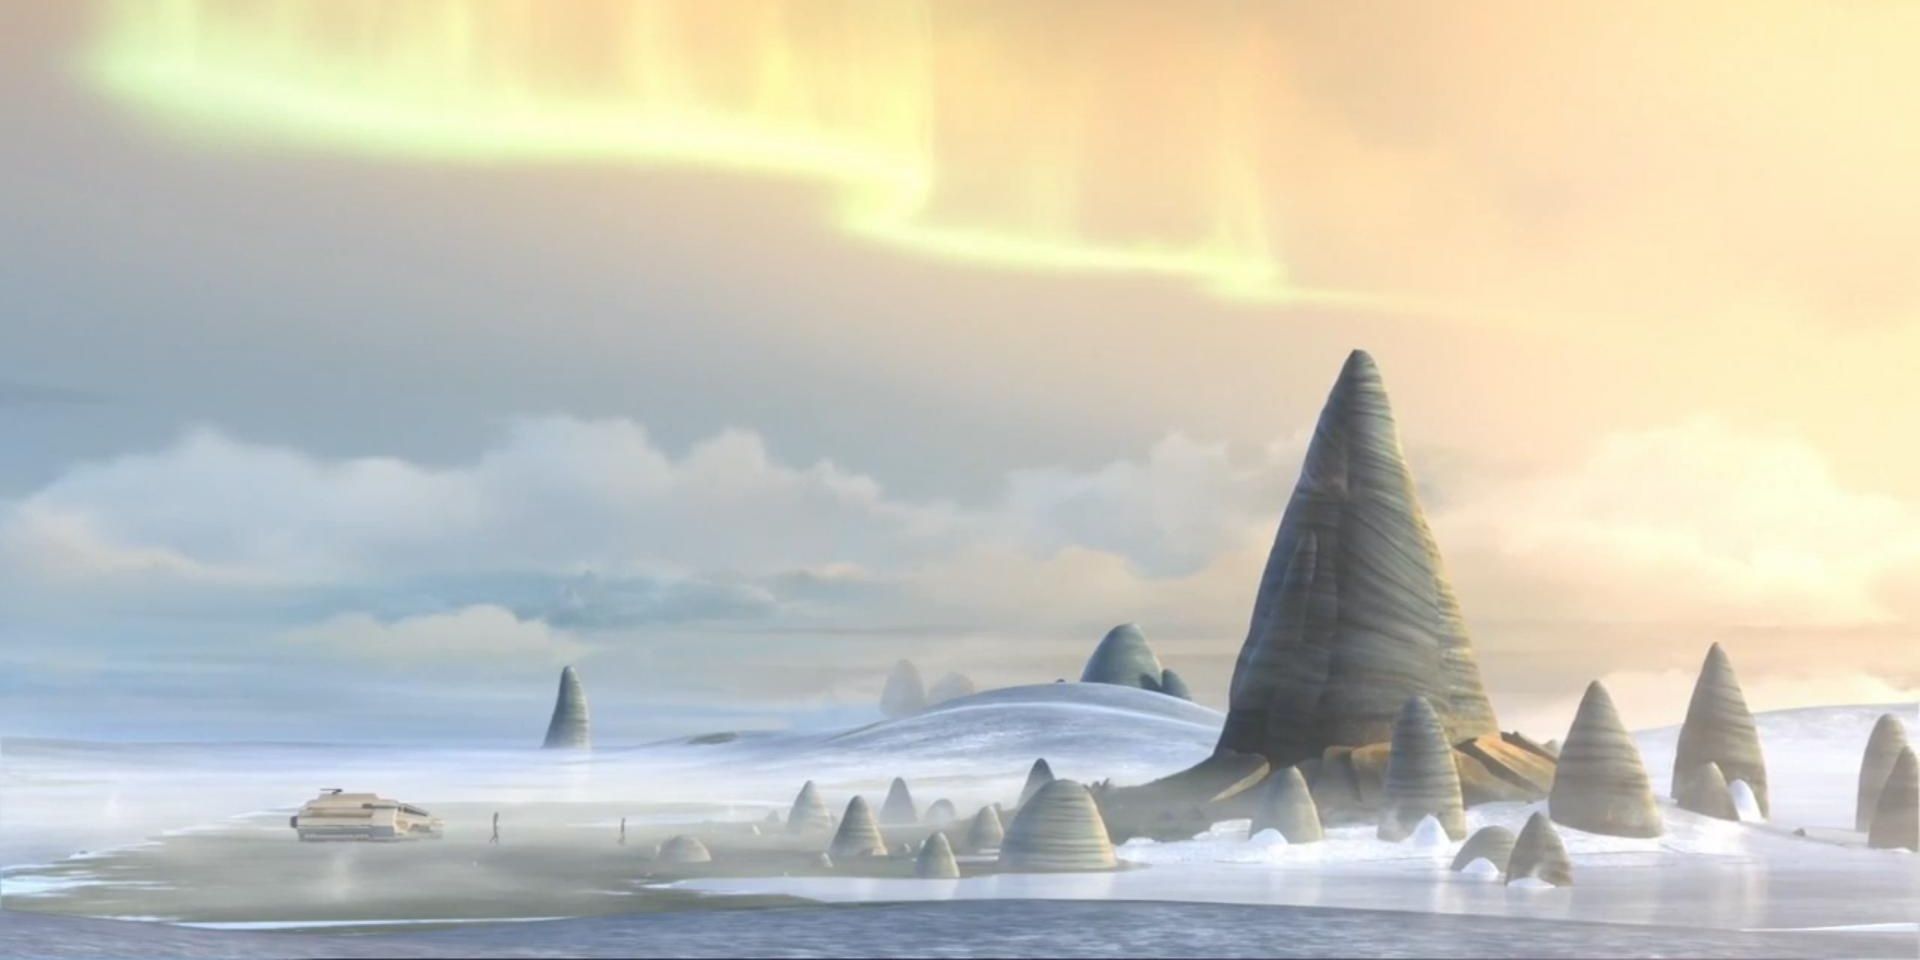 A landscape from Lothal in Star Wars